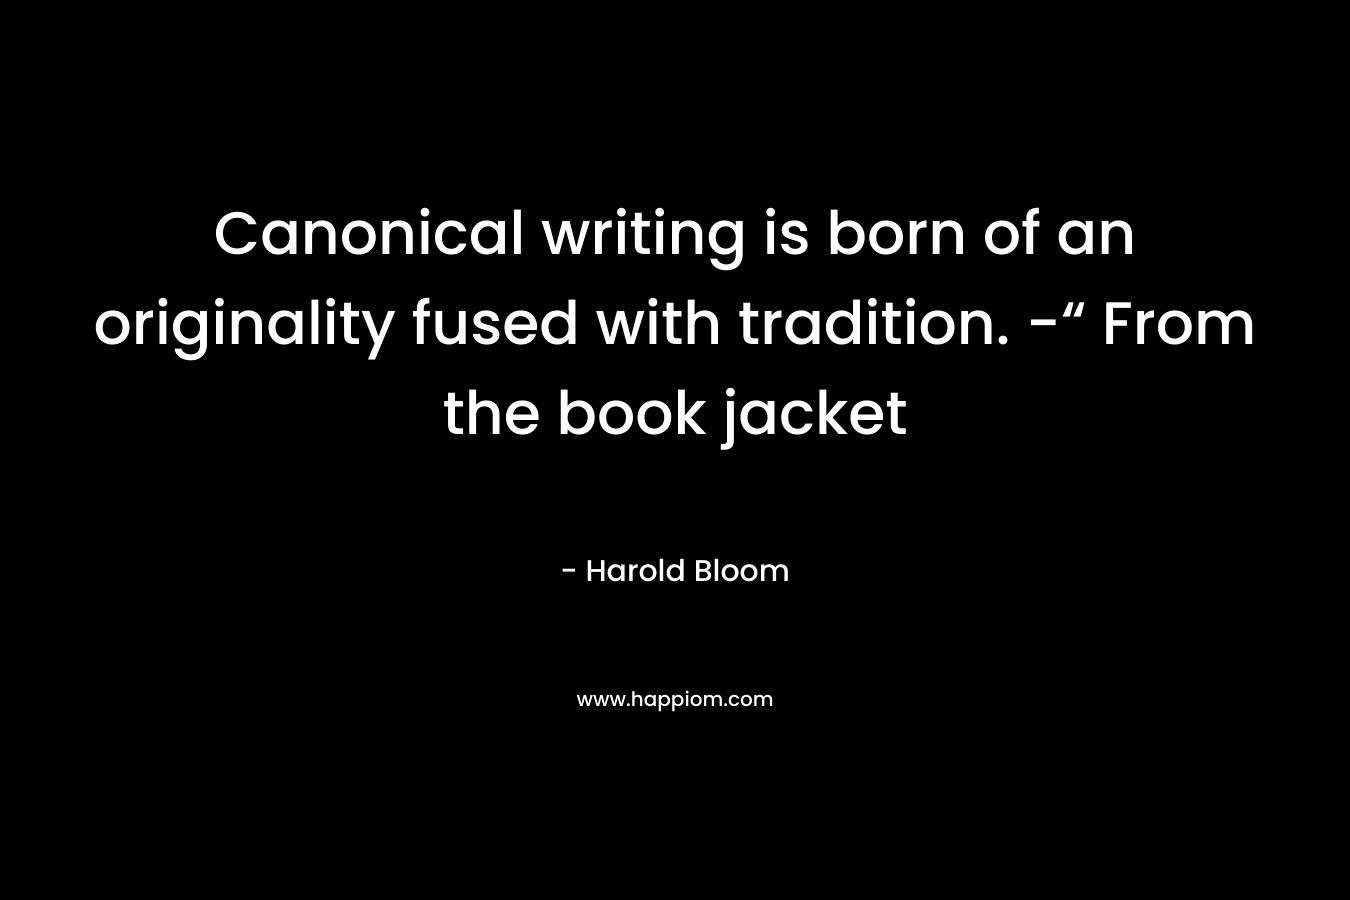 Canonical writing is born of an originality fused with tradition. -“ From the book jacket